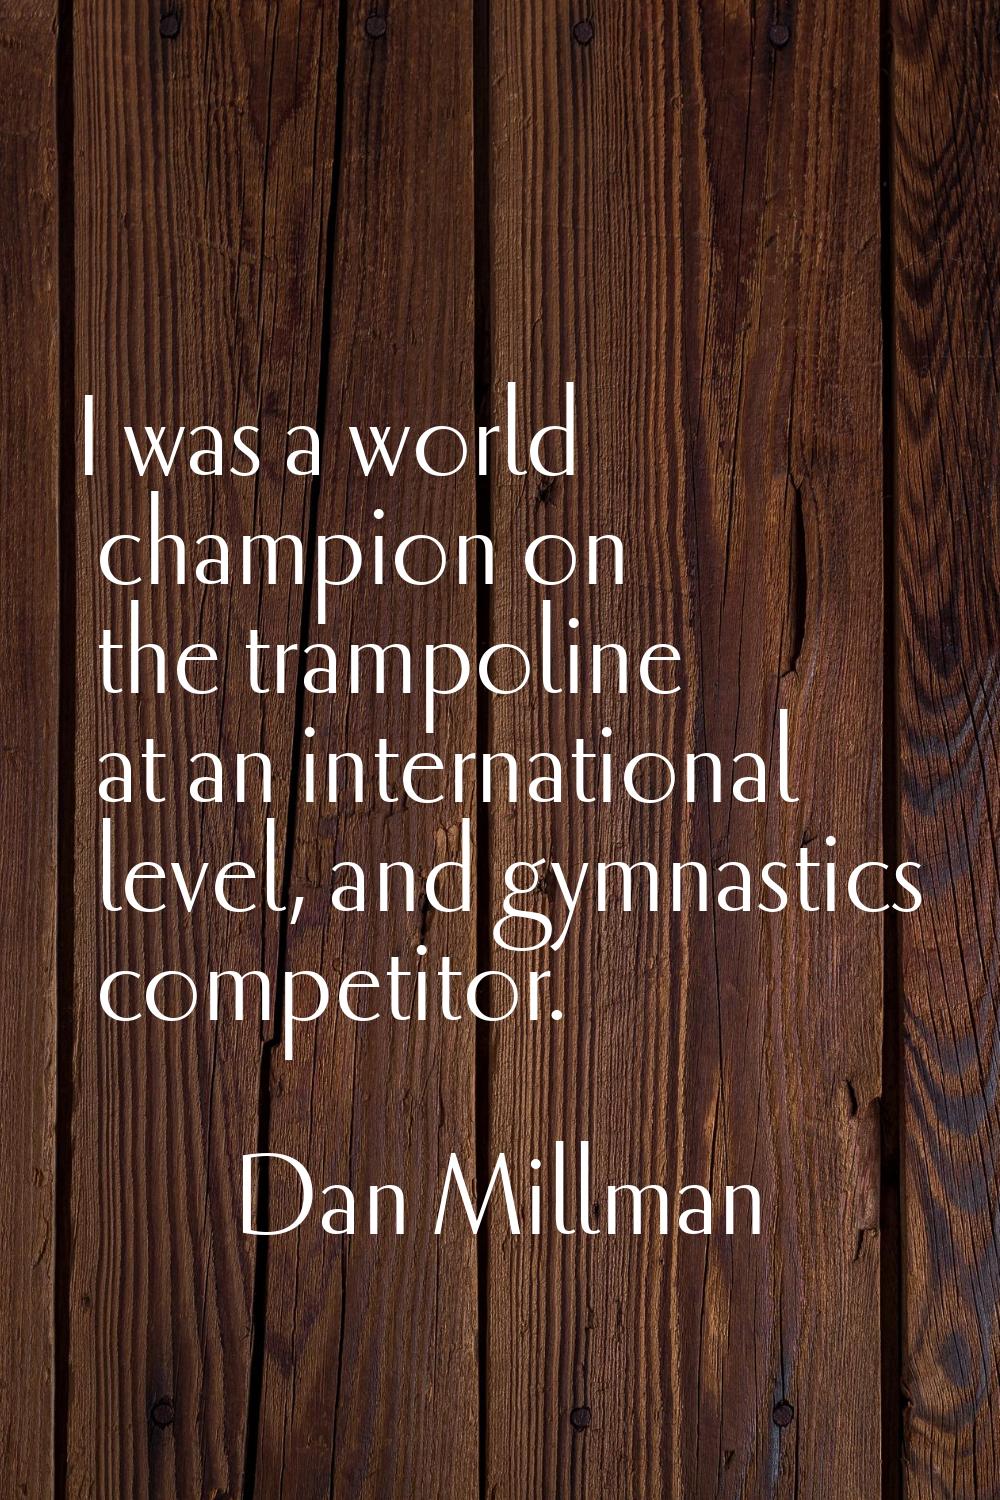 I was a world champion on the trampoline at an international level, and gymnastics competitor.